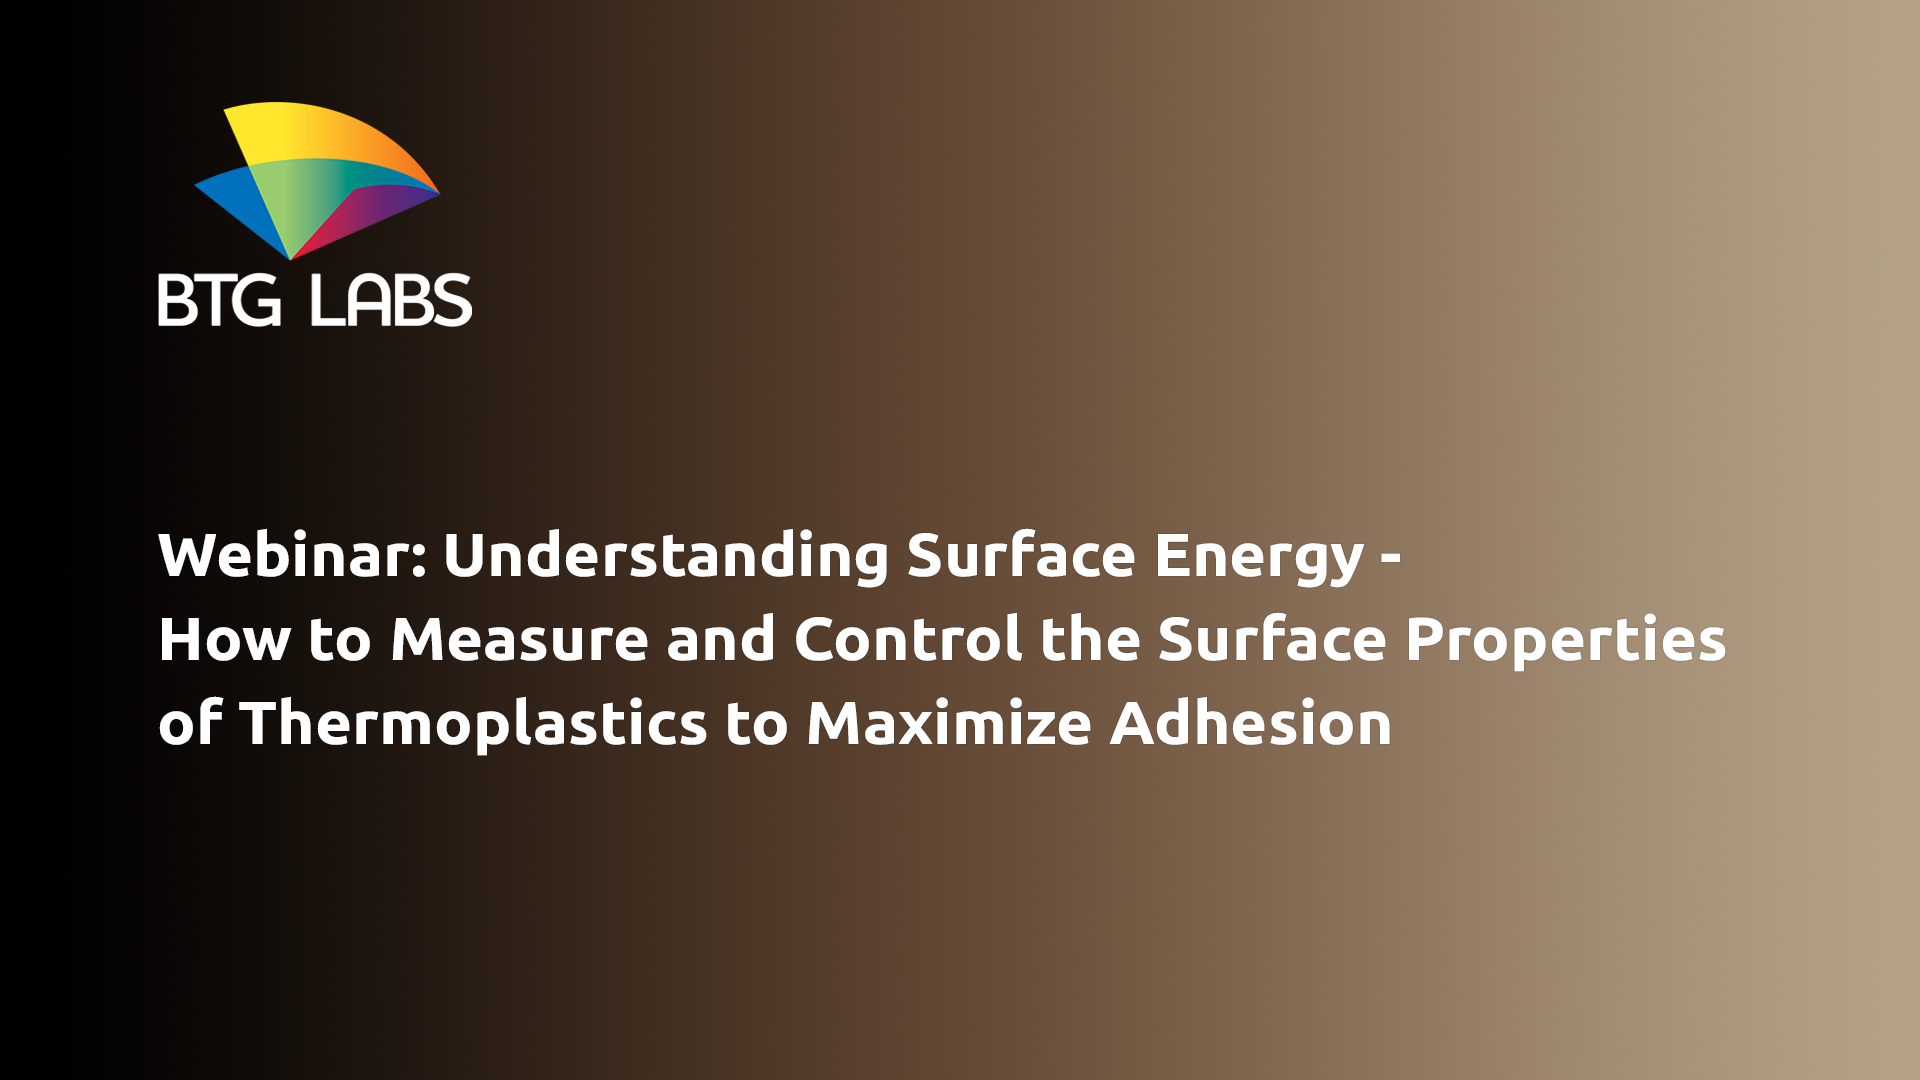 Webinar: Understanding Surface Energy -How to Measure and Control the Surface Properties of Thermoplastics to Maximize Adhesion